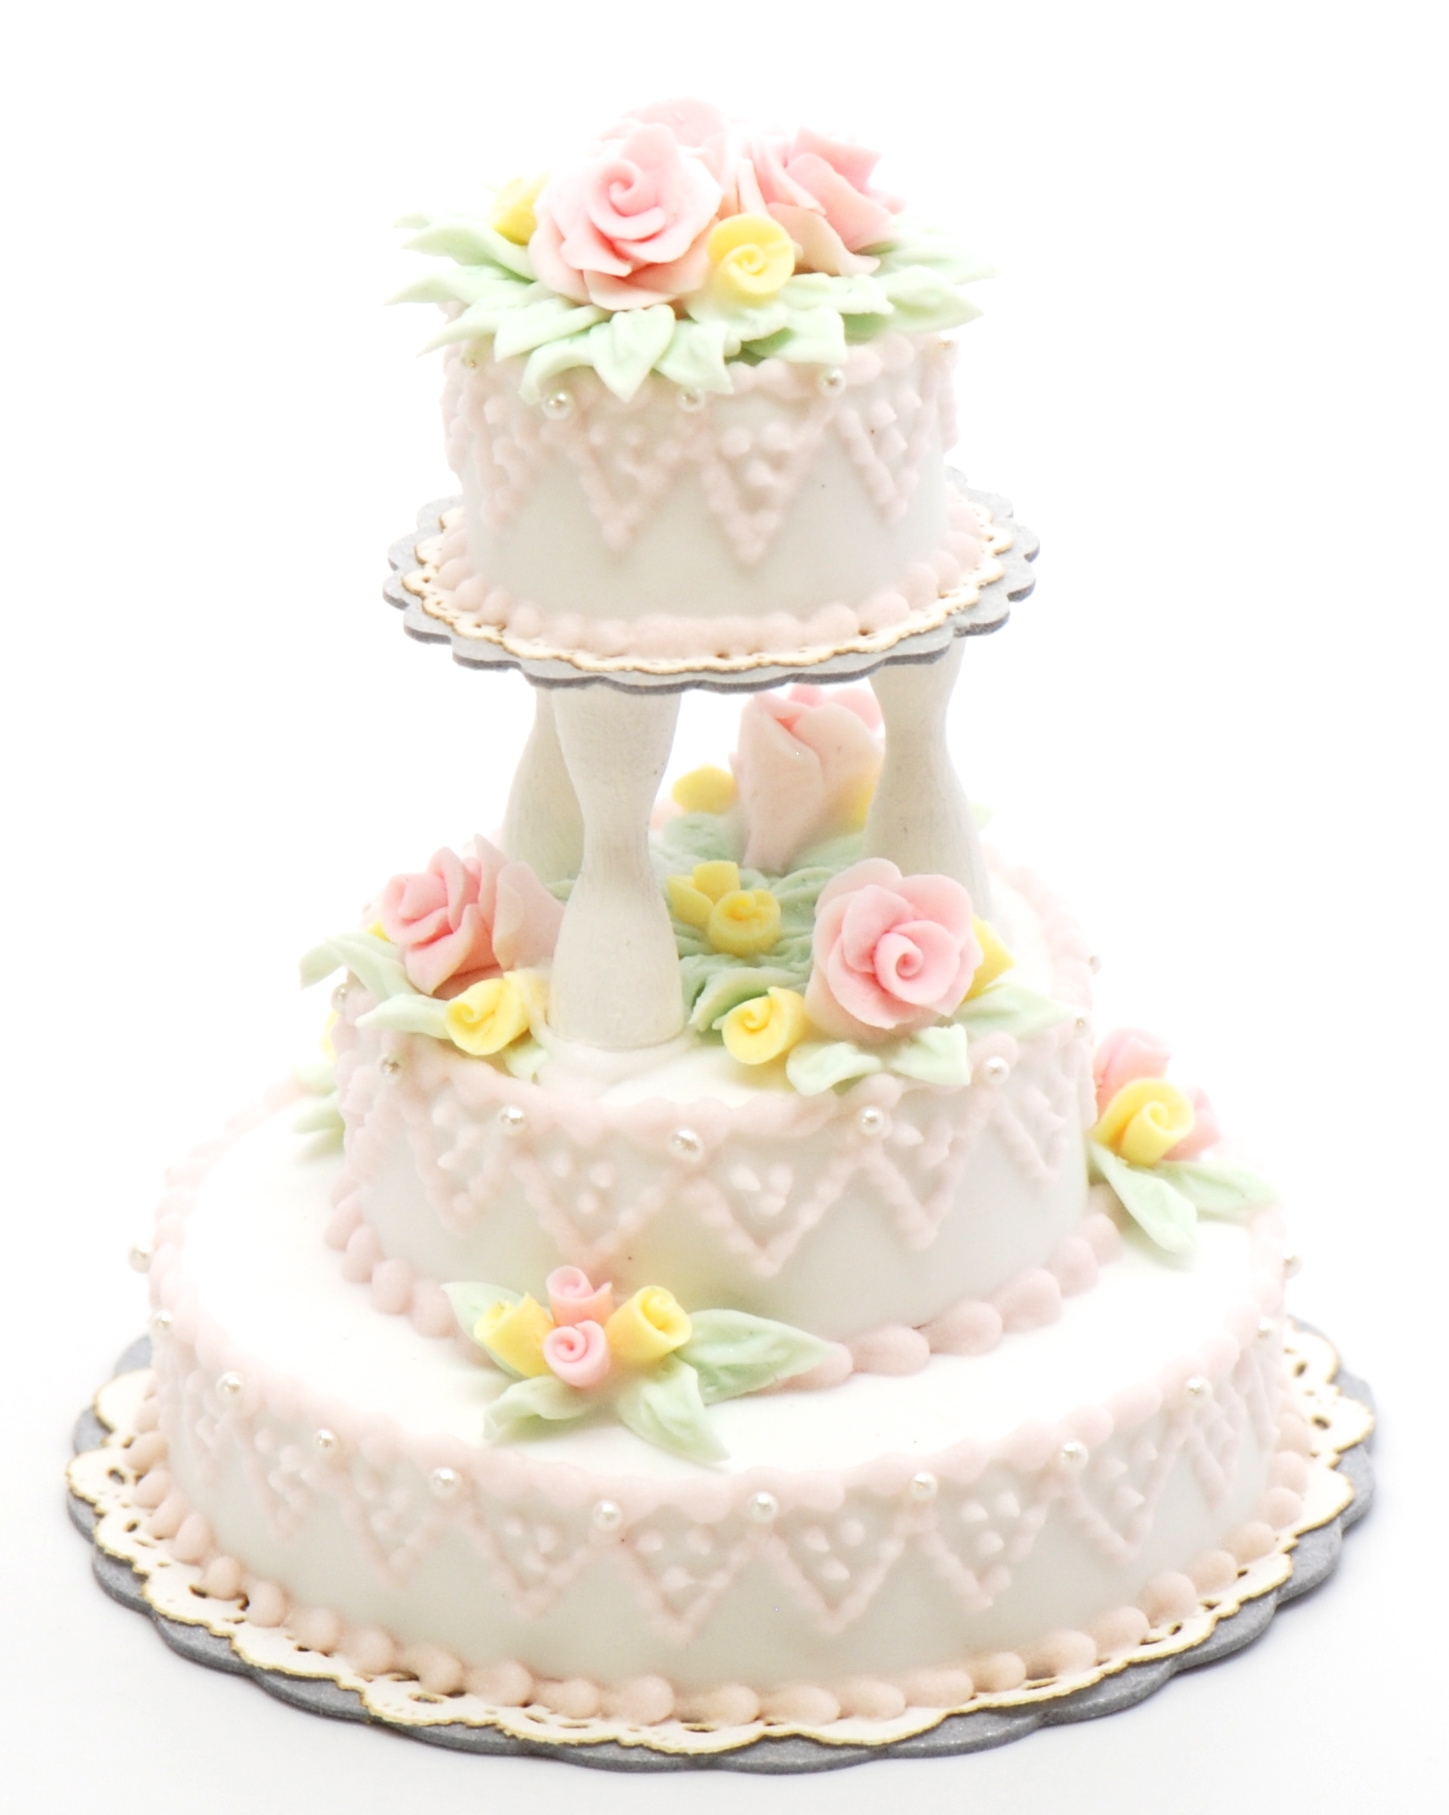 WEDDING CAKE BEAUTIFUL SIX TIER CAKE FOR 12TH SCALE DOLLS HOUSE